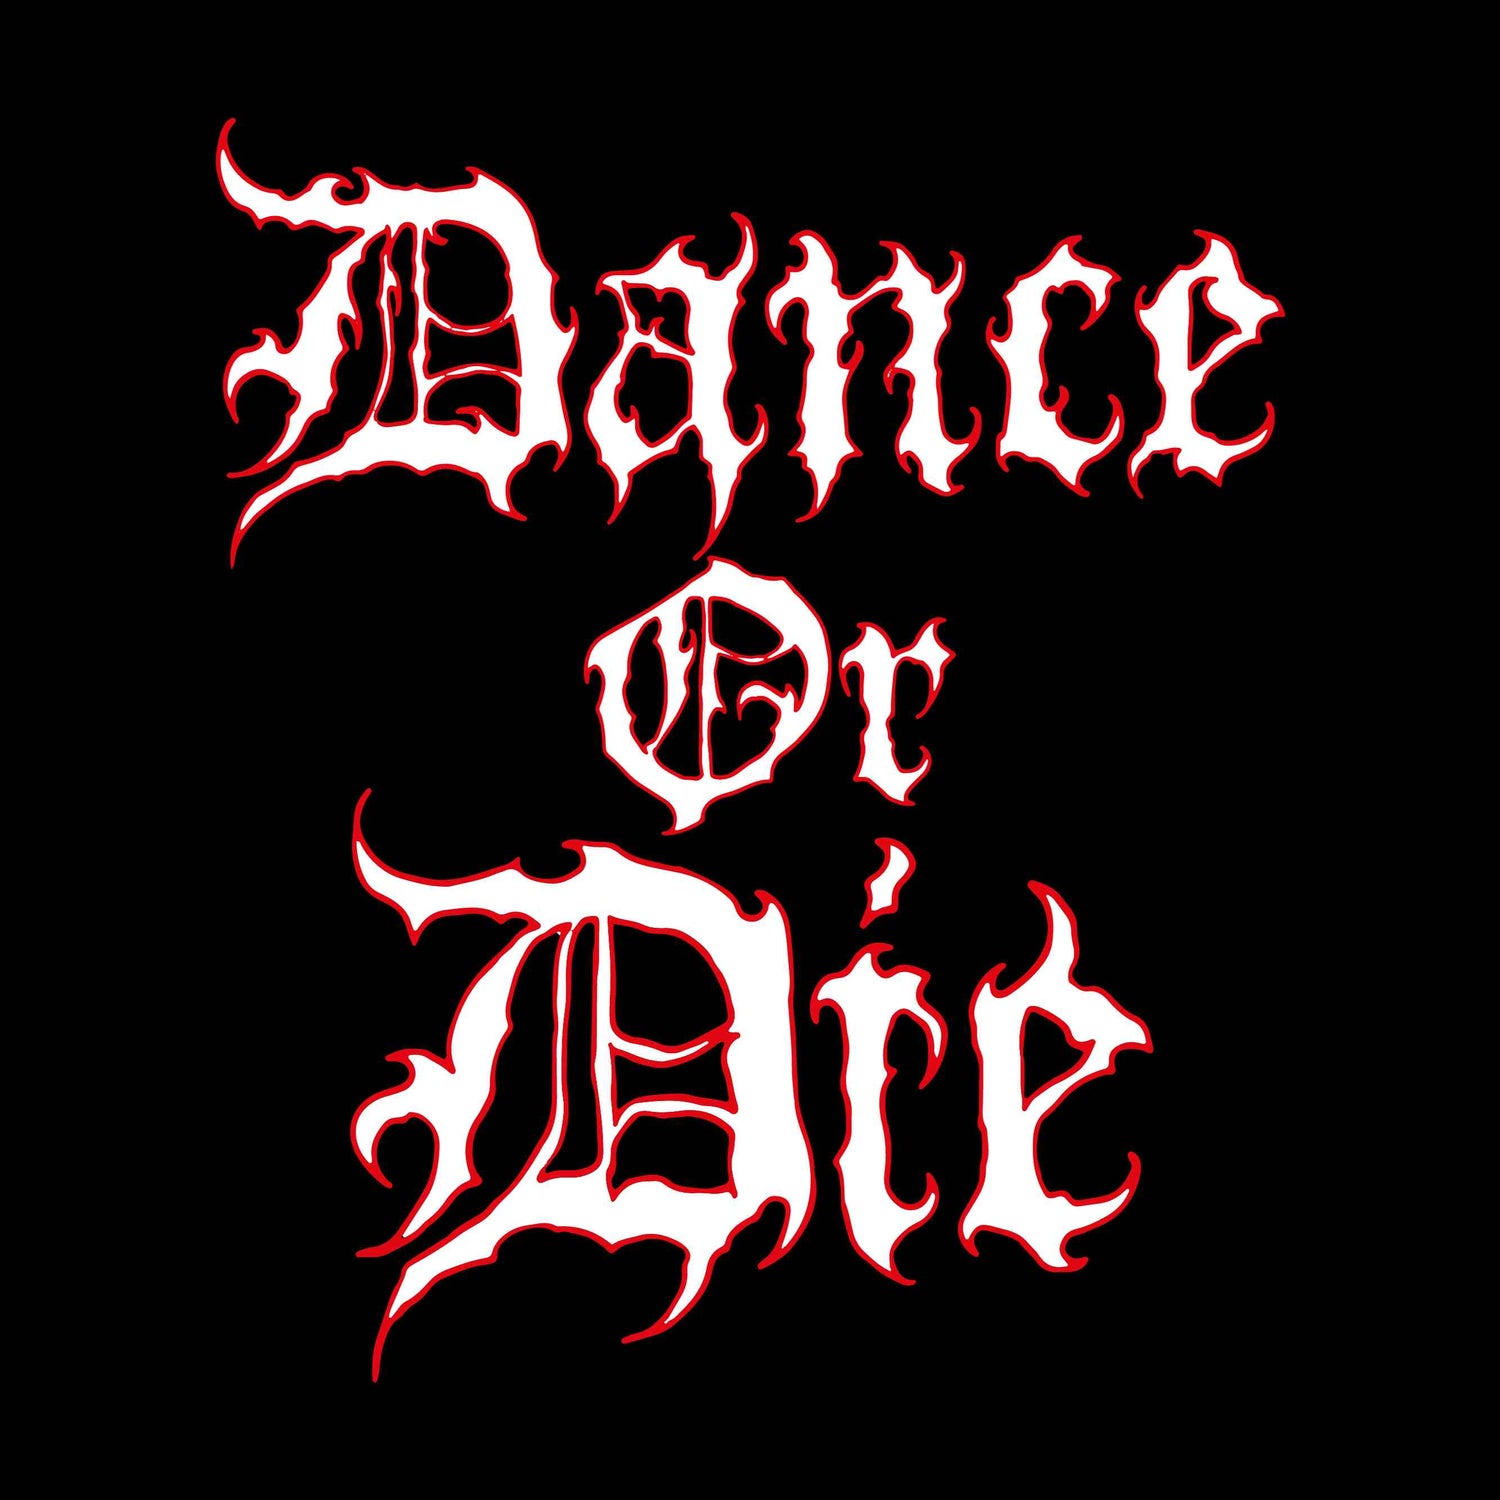 NEW COLLECTION - DANCE OR DIE